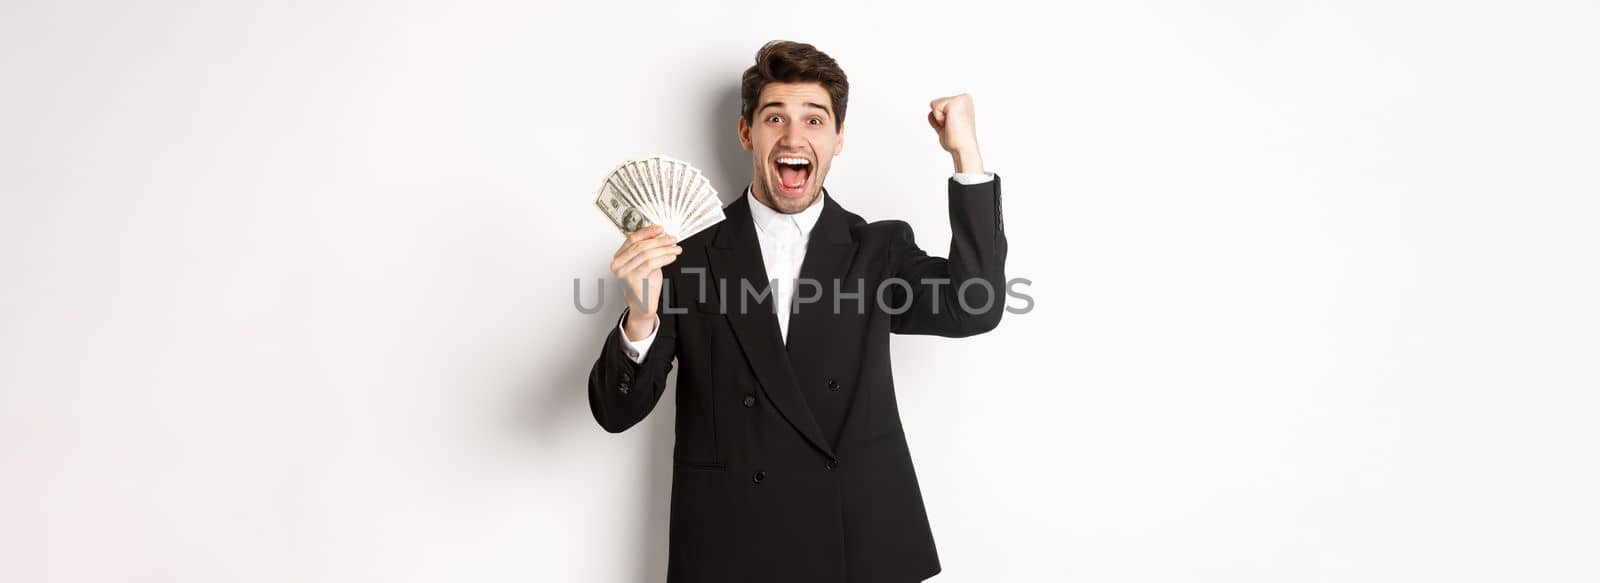 Portrait of handsome businessman in black suit, winning money and rejoicing, raising hand up with excitement, standing against white background.